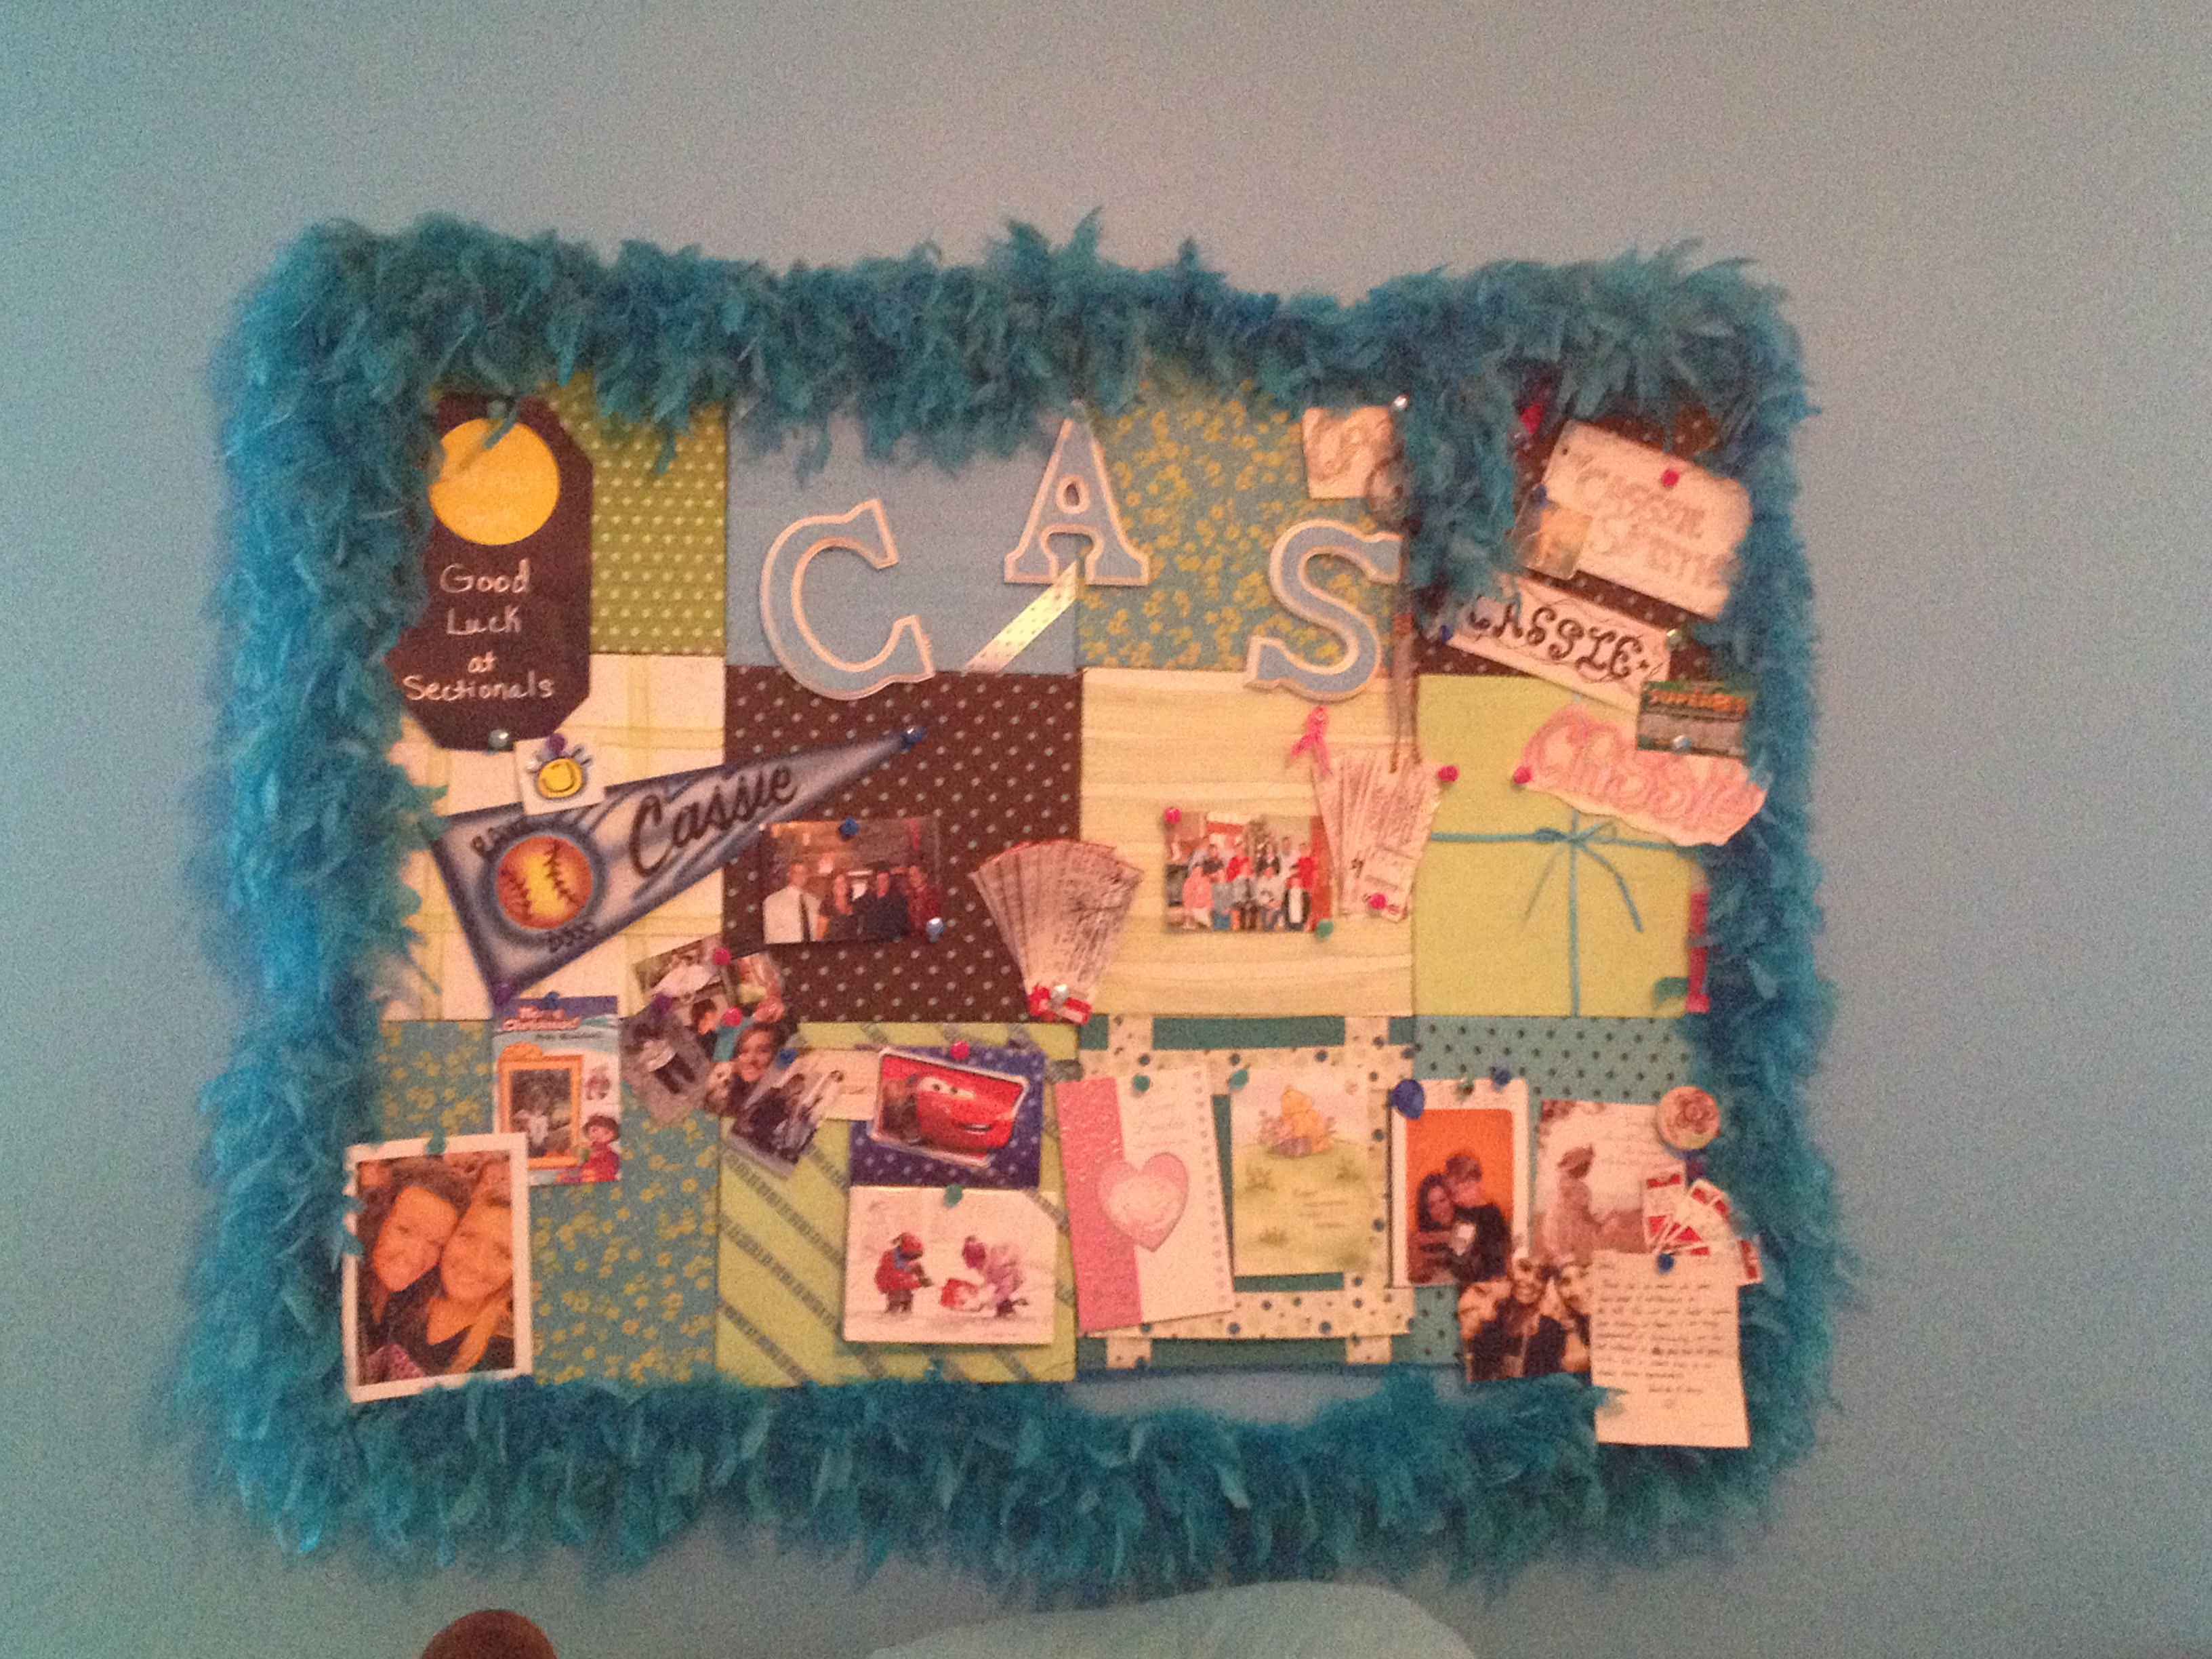 Start with small cork board squares, and buy